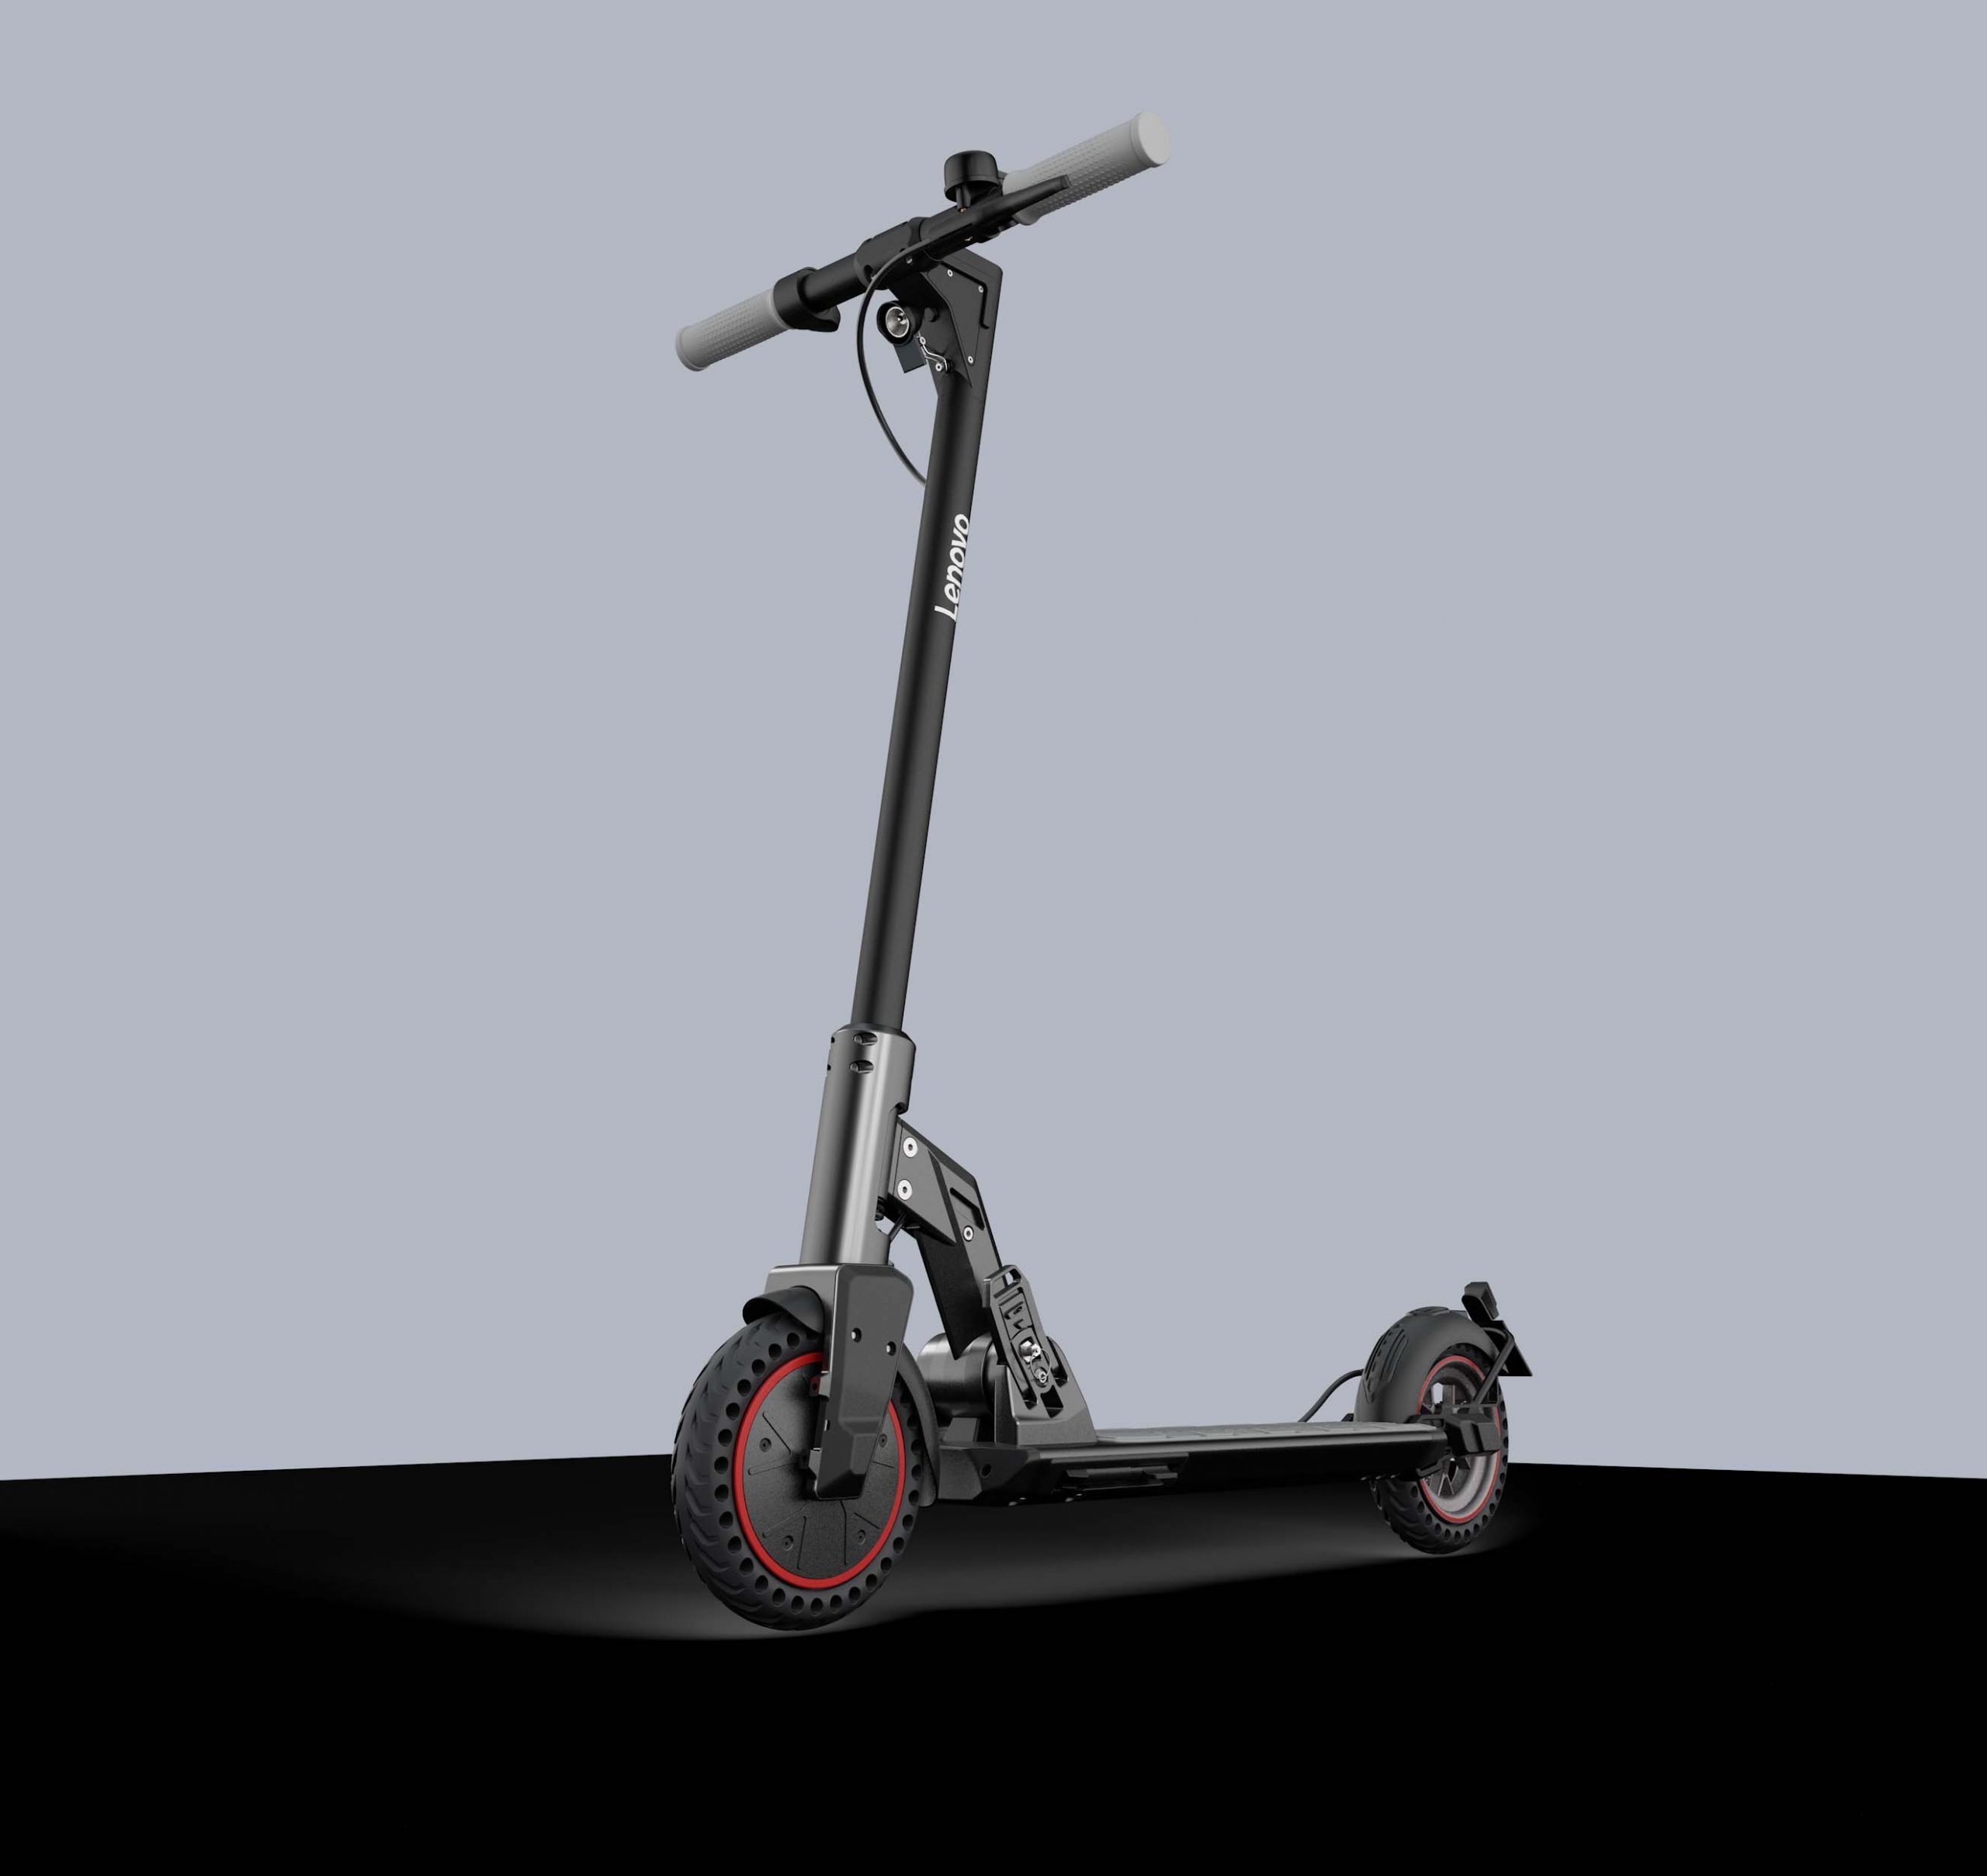 Experience smarter riding and safety with the Lenovo M2 Electric Scooter